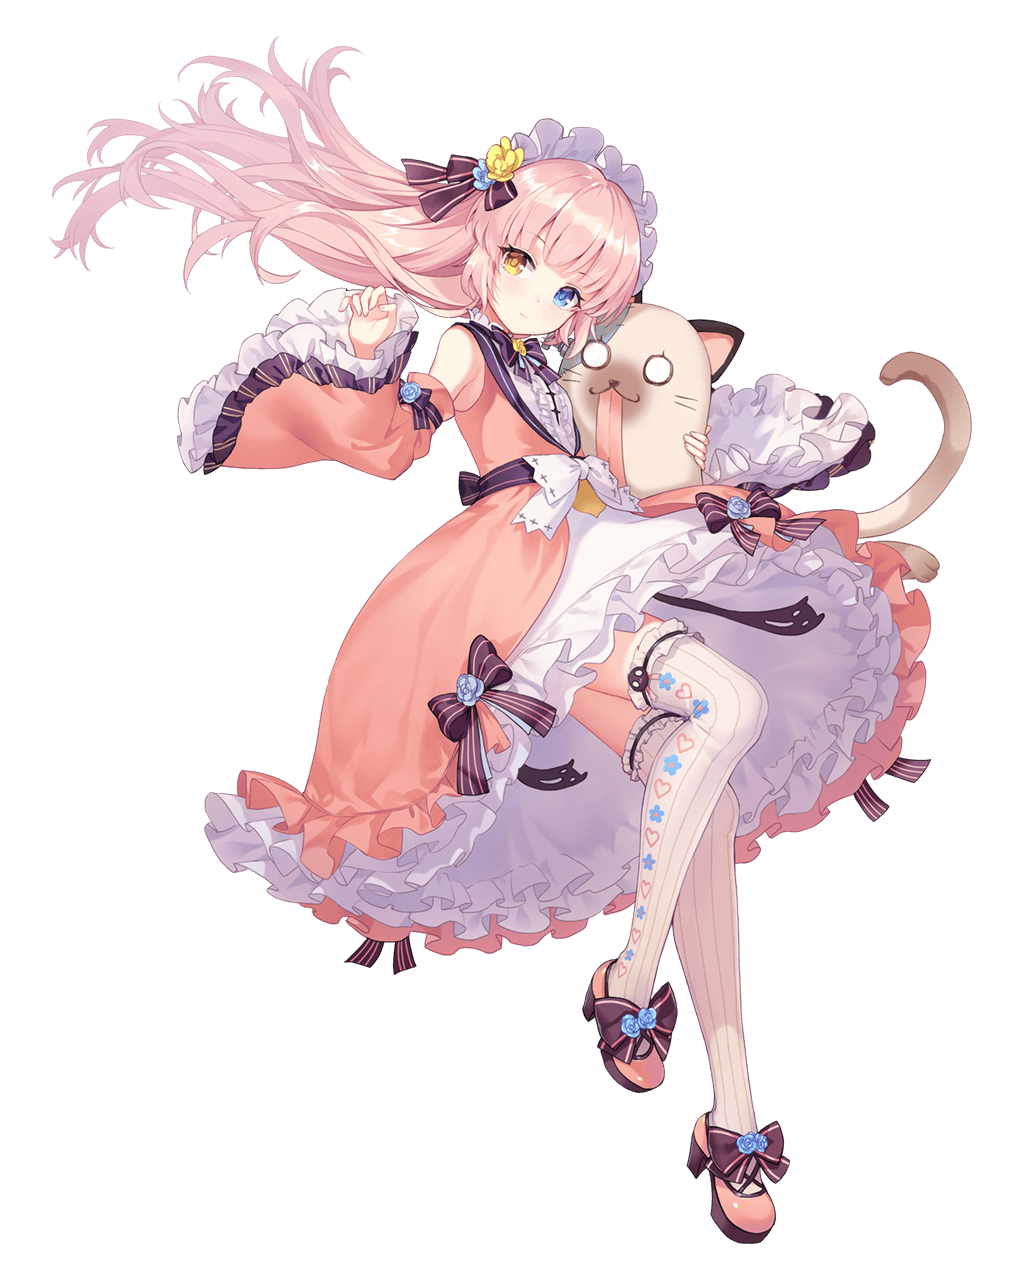 1girl bare_shoulders blue_eyes bow bowtie criin detached_sleeves doll_hug dress eksistere_kyrenia floating_hair frilled_dress frilled_sleeves frills full_body girl_cafe_gun headdress heterochromia highres long_hair looking_at_viewer official_art pink_dress pink_hair ribbed_legwear shoes solo striped striped_bow stuffed_animal stuffed_cat stuffed_toy thigh-highs transparent_background white_legwear wide_sleeves yellow_eyes